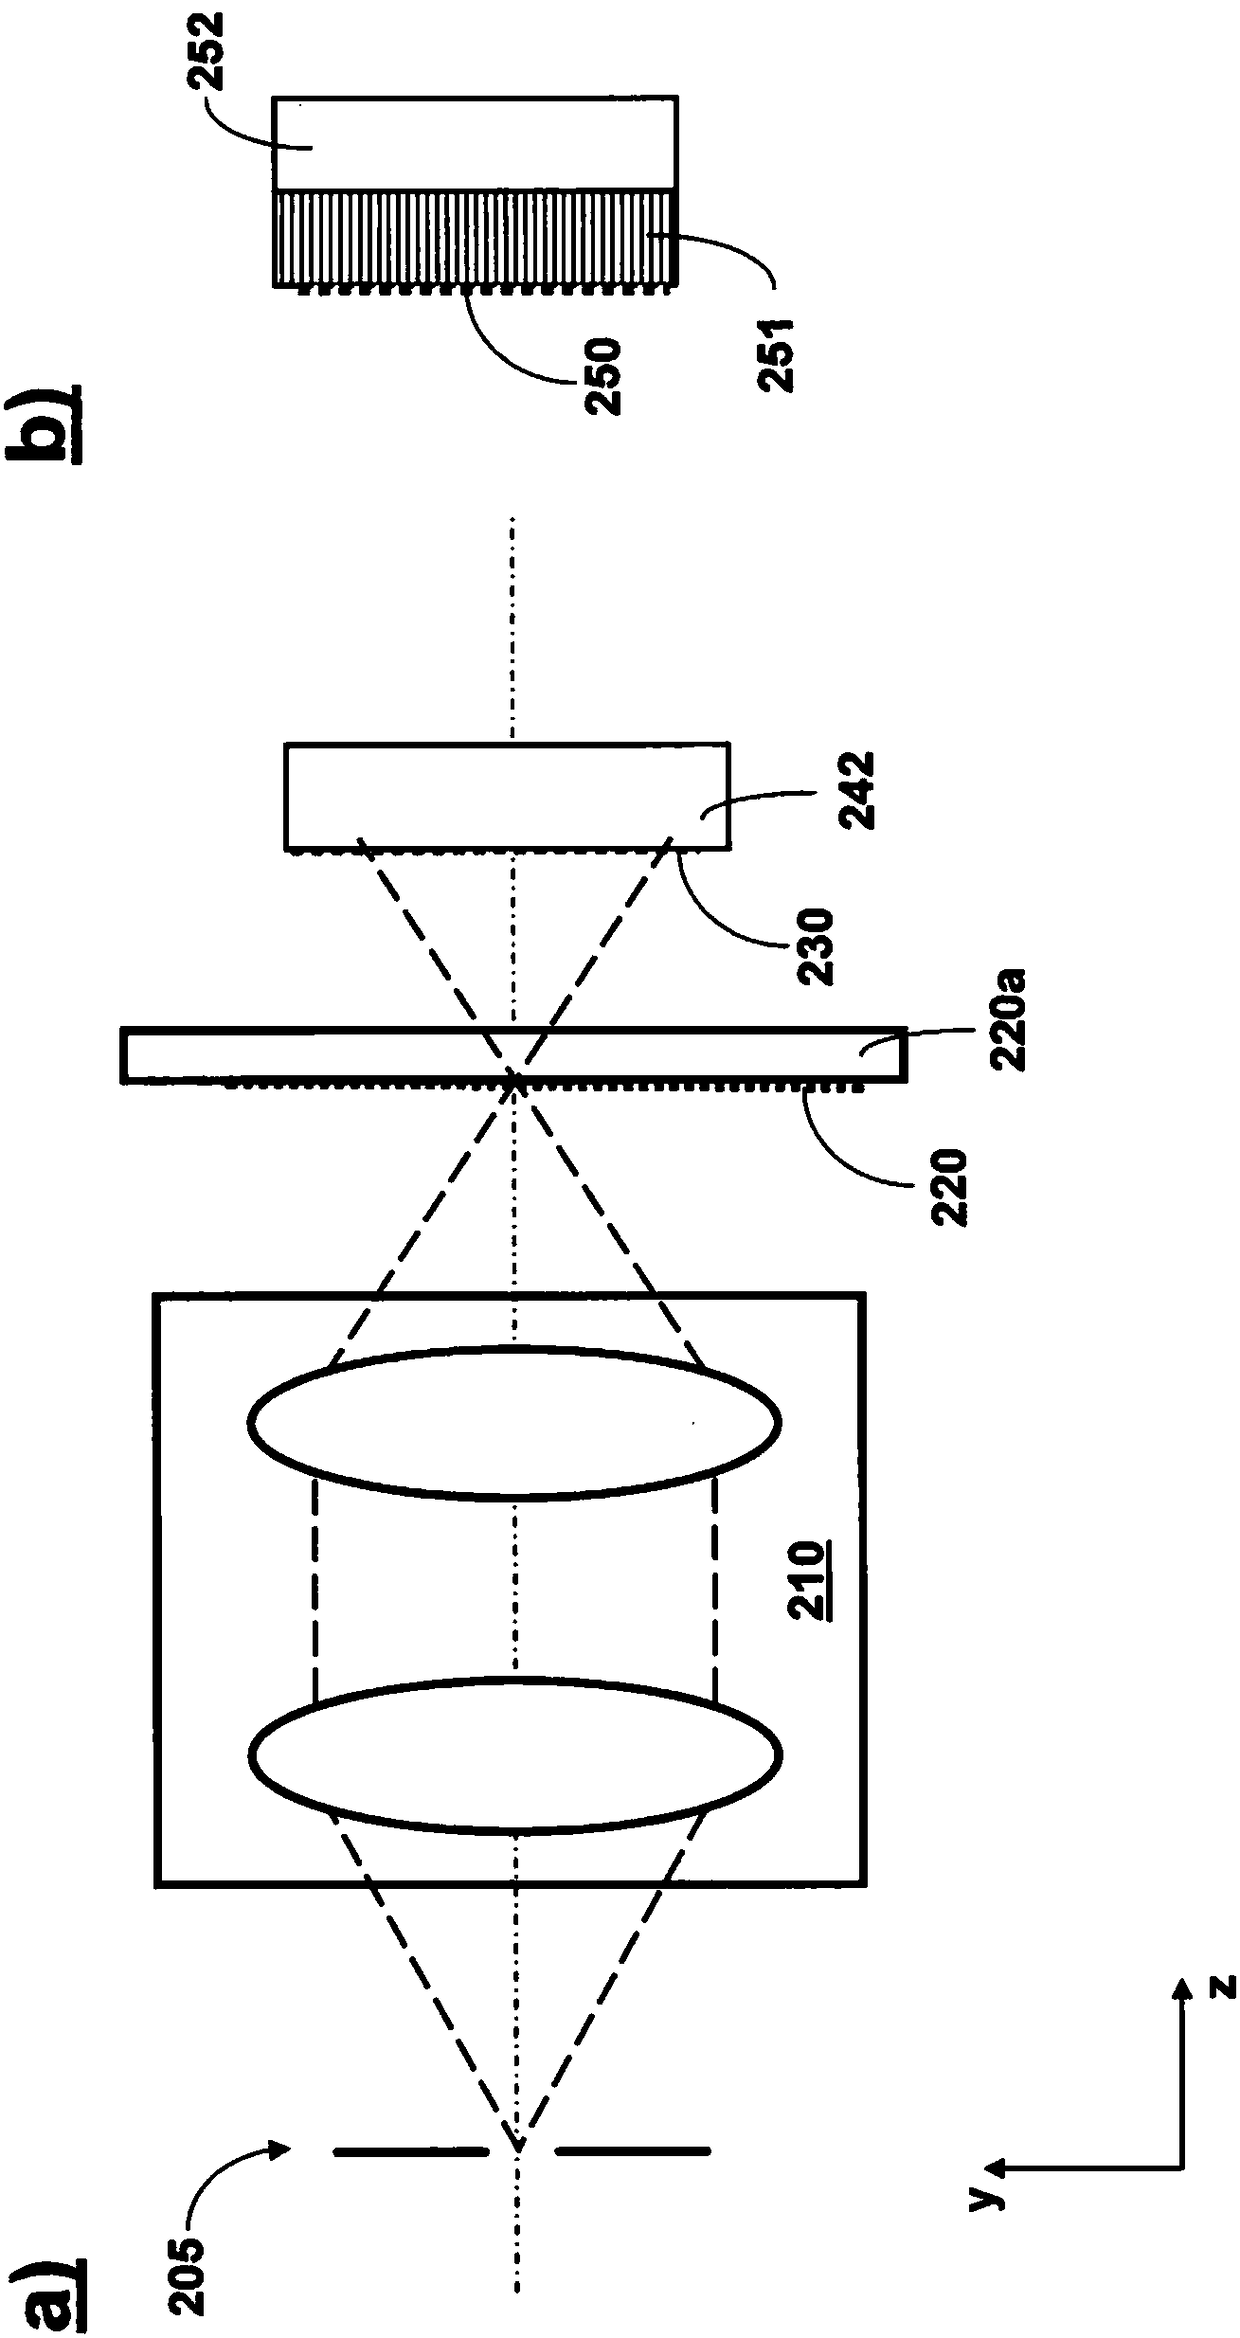 Device and method for wavefront analysis